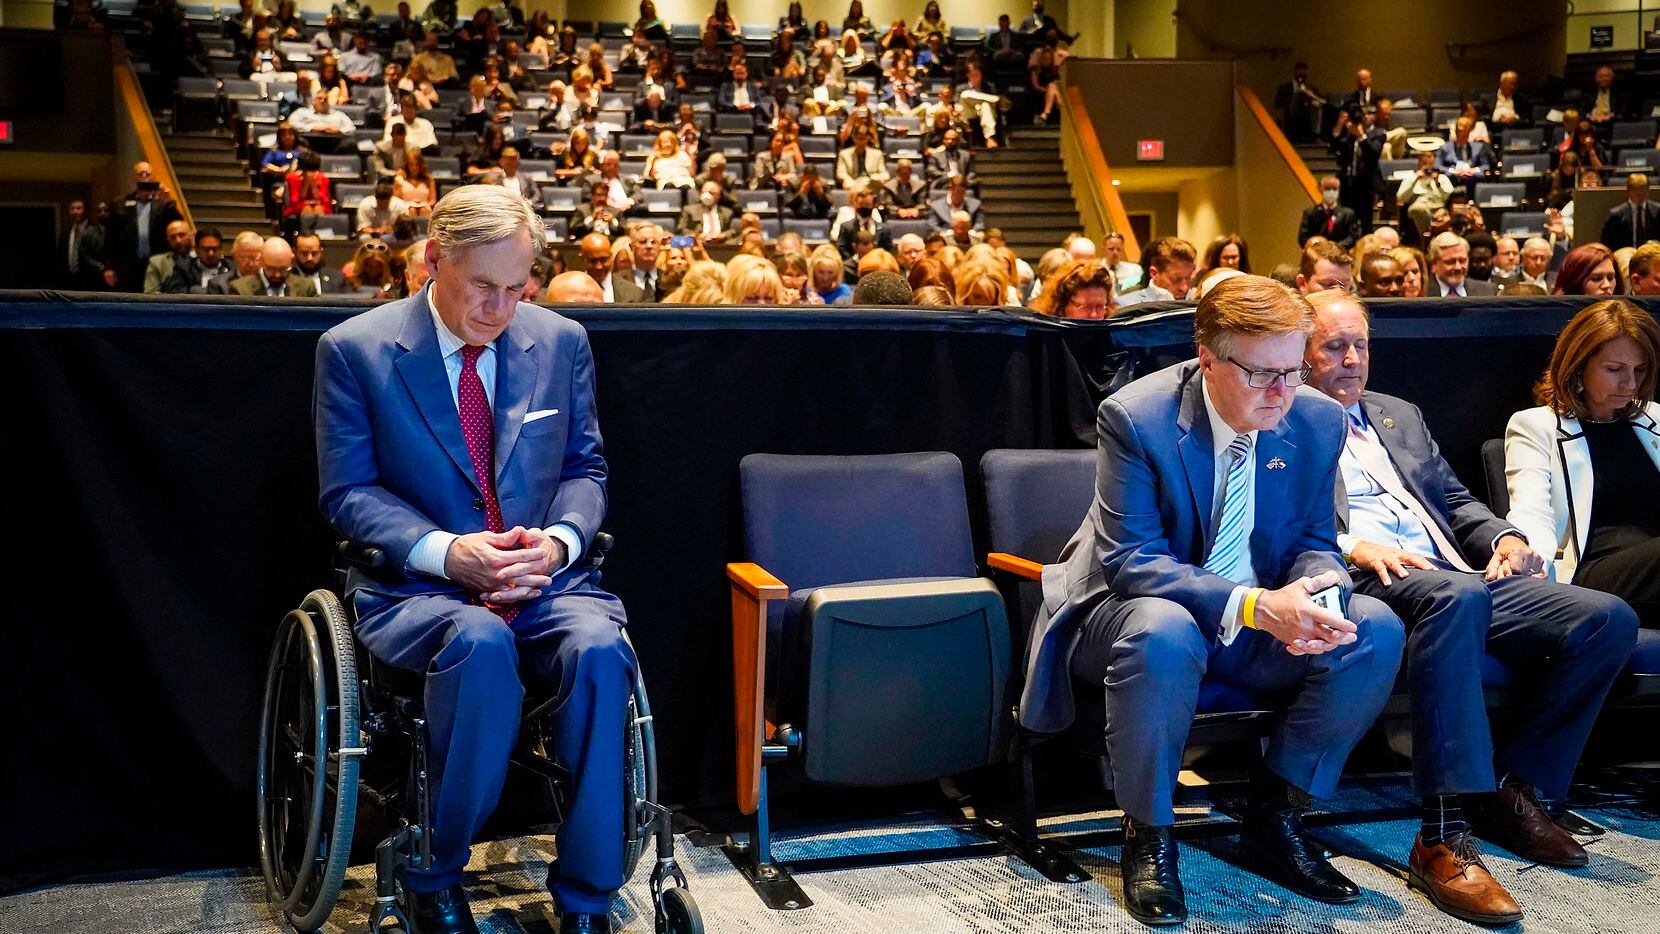 If Gov. Greg Abbott couldn’t get choked up over little kids Tuesday, is he likely to budge...